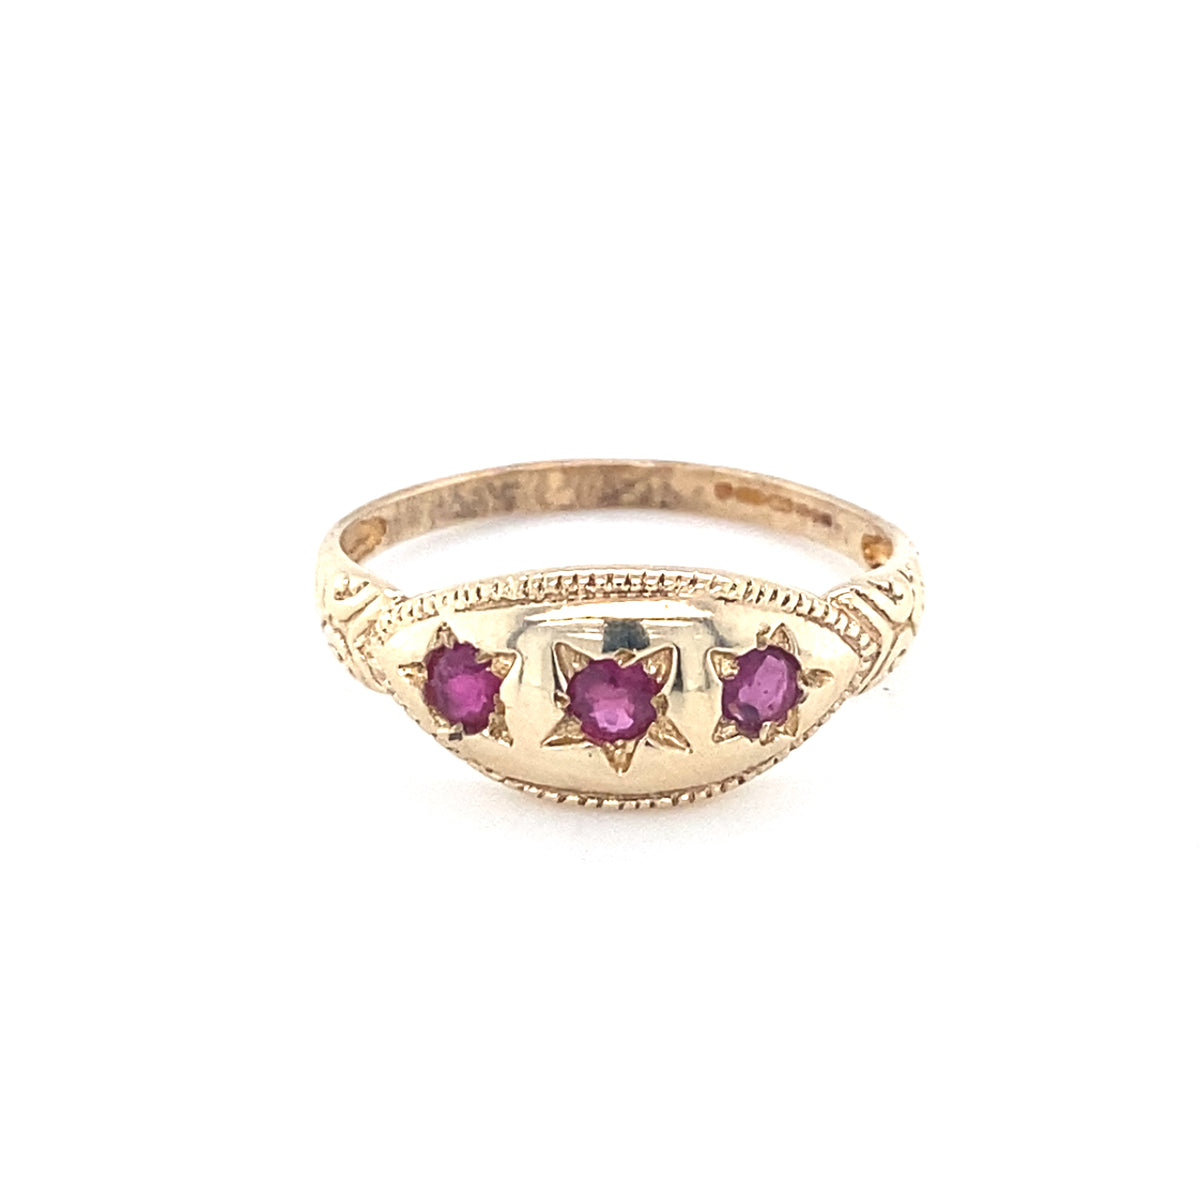 Antique 9kt Gold Three Stone Ruby Ring